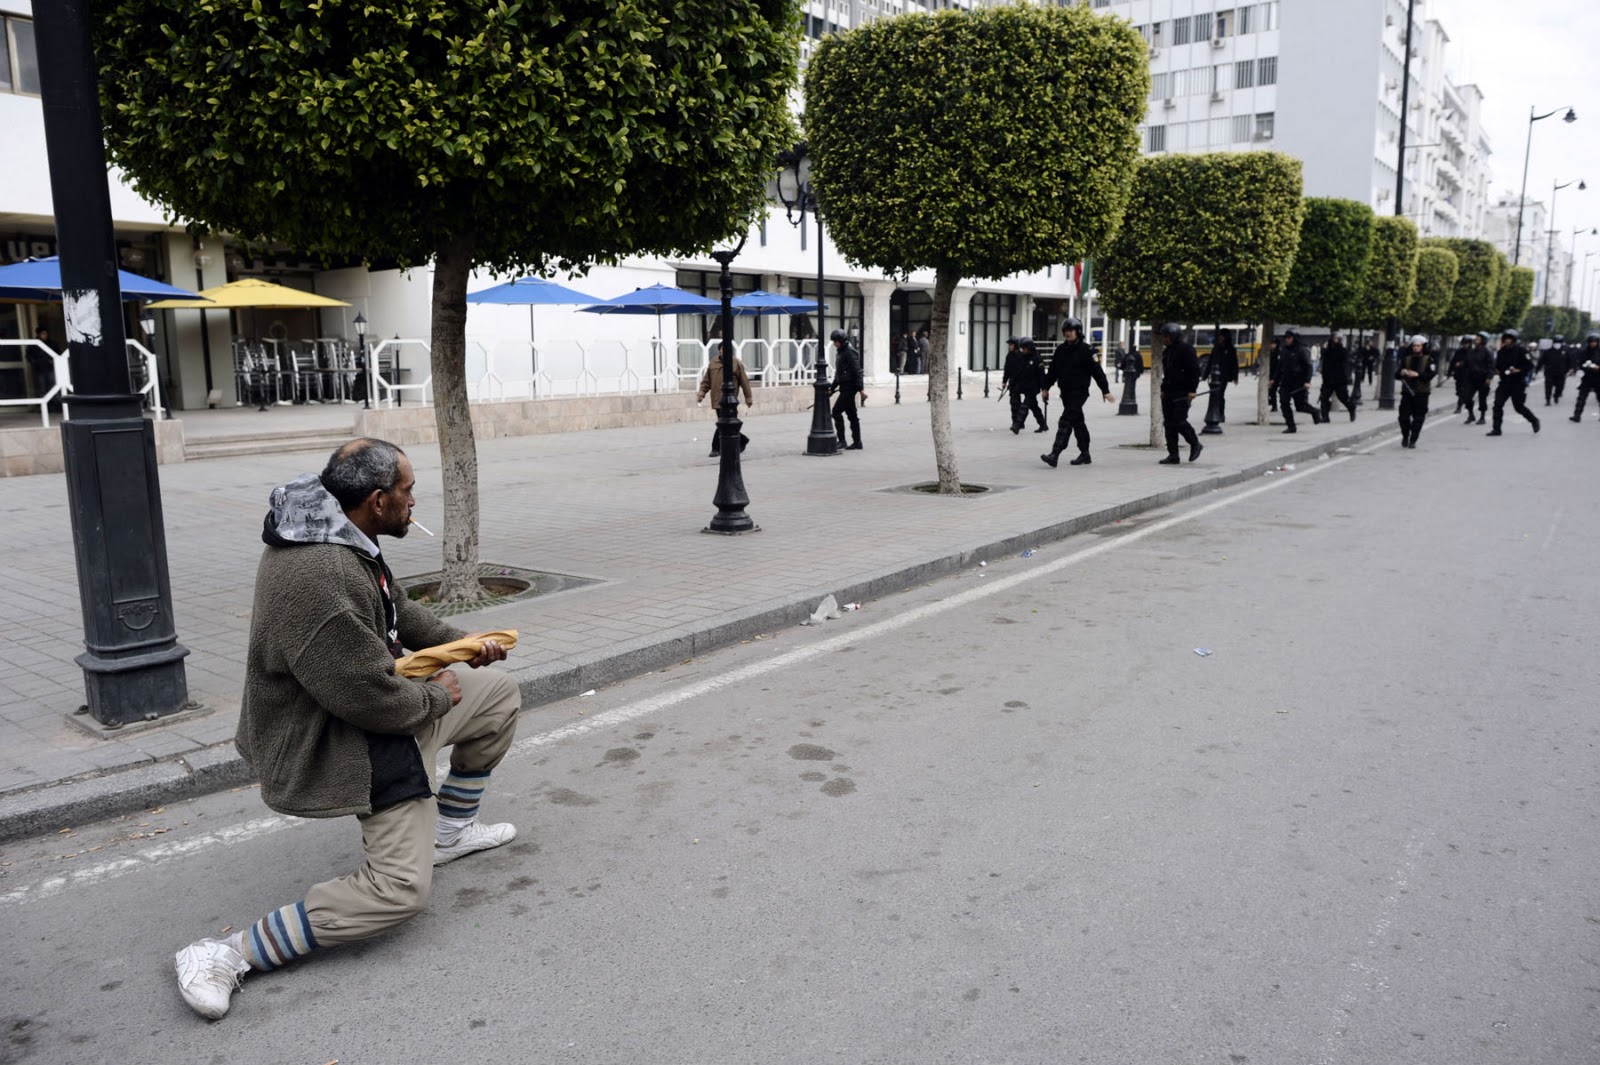 Tunisian man holds back riot police with a baguette during the revolution. Tunisia, 2010-11